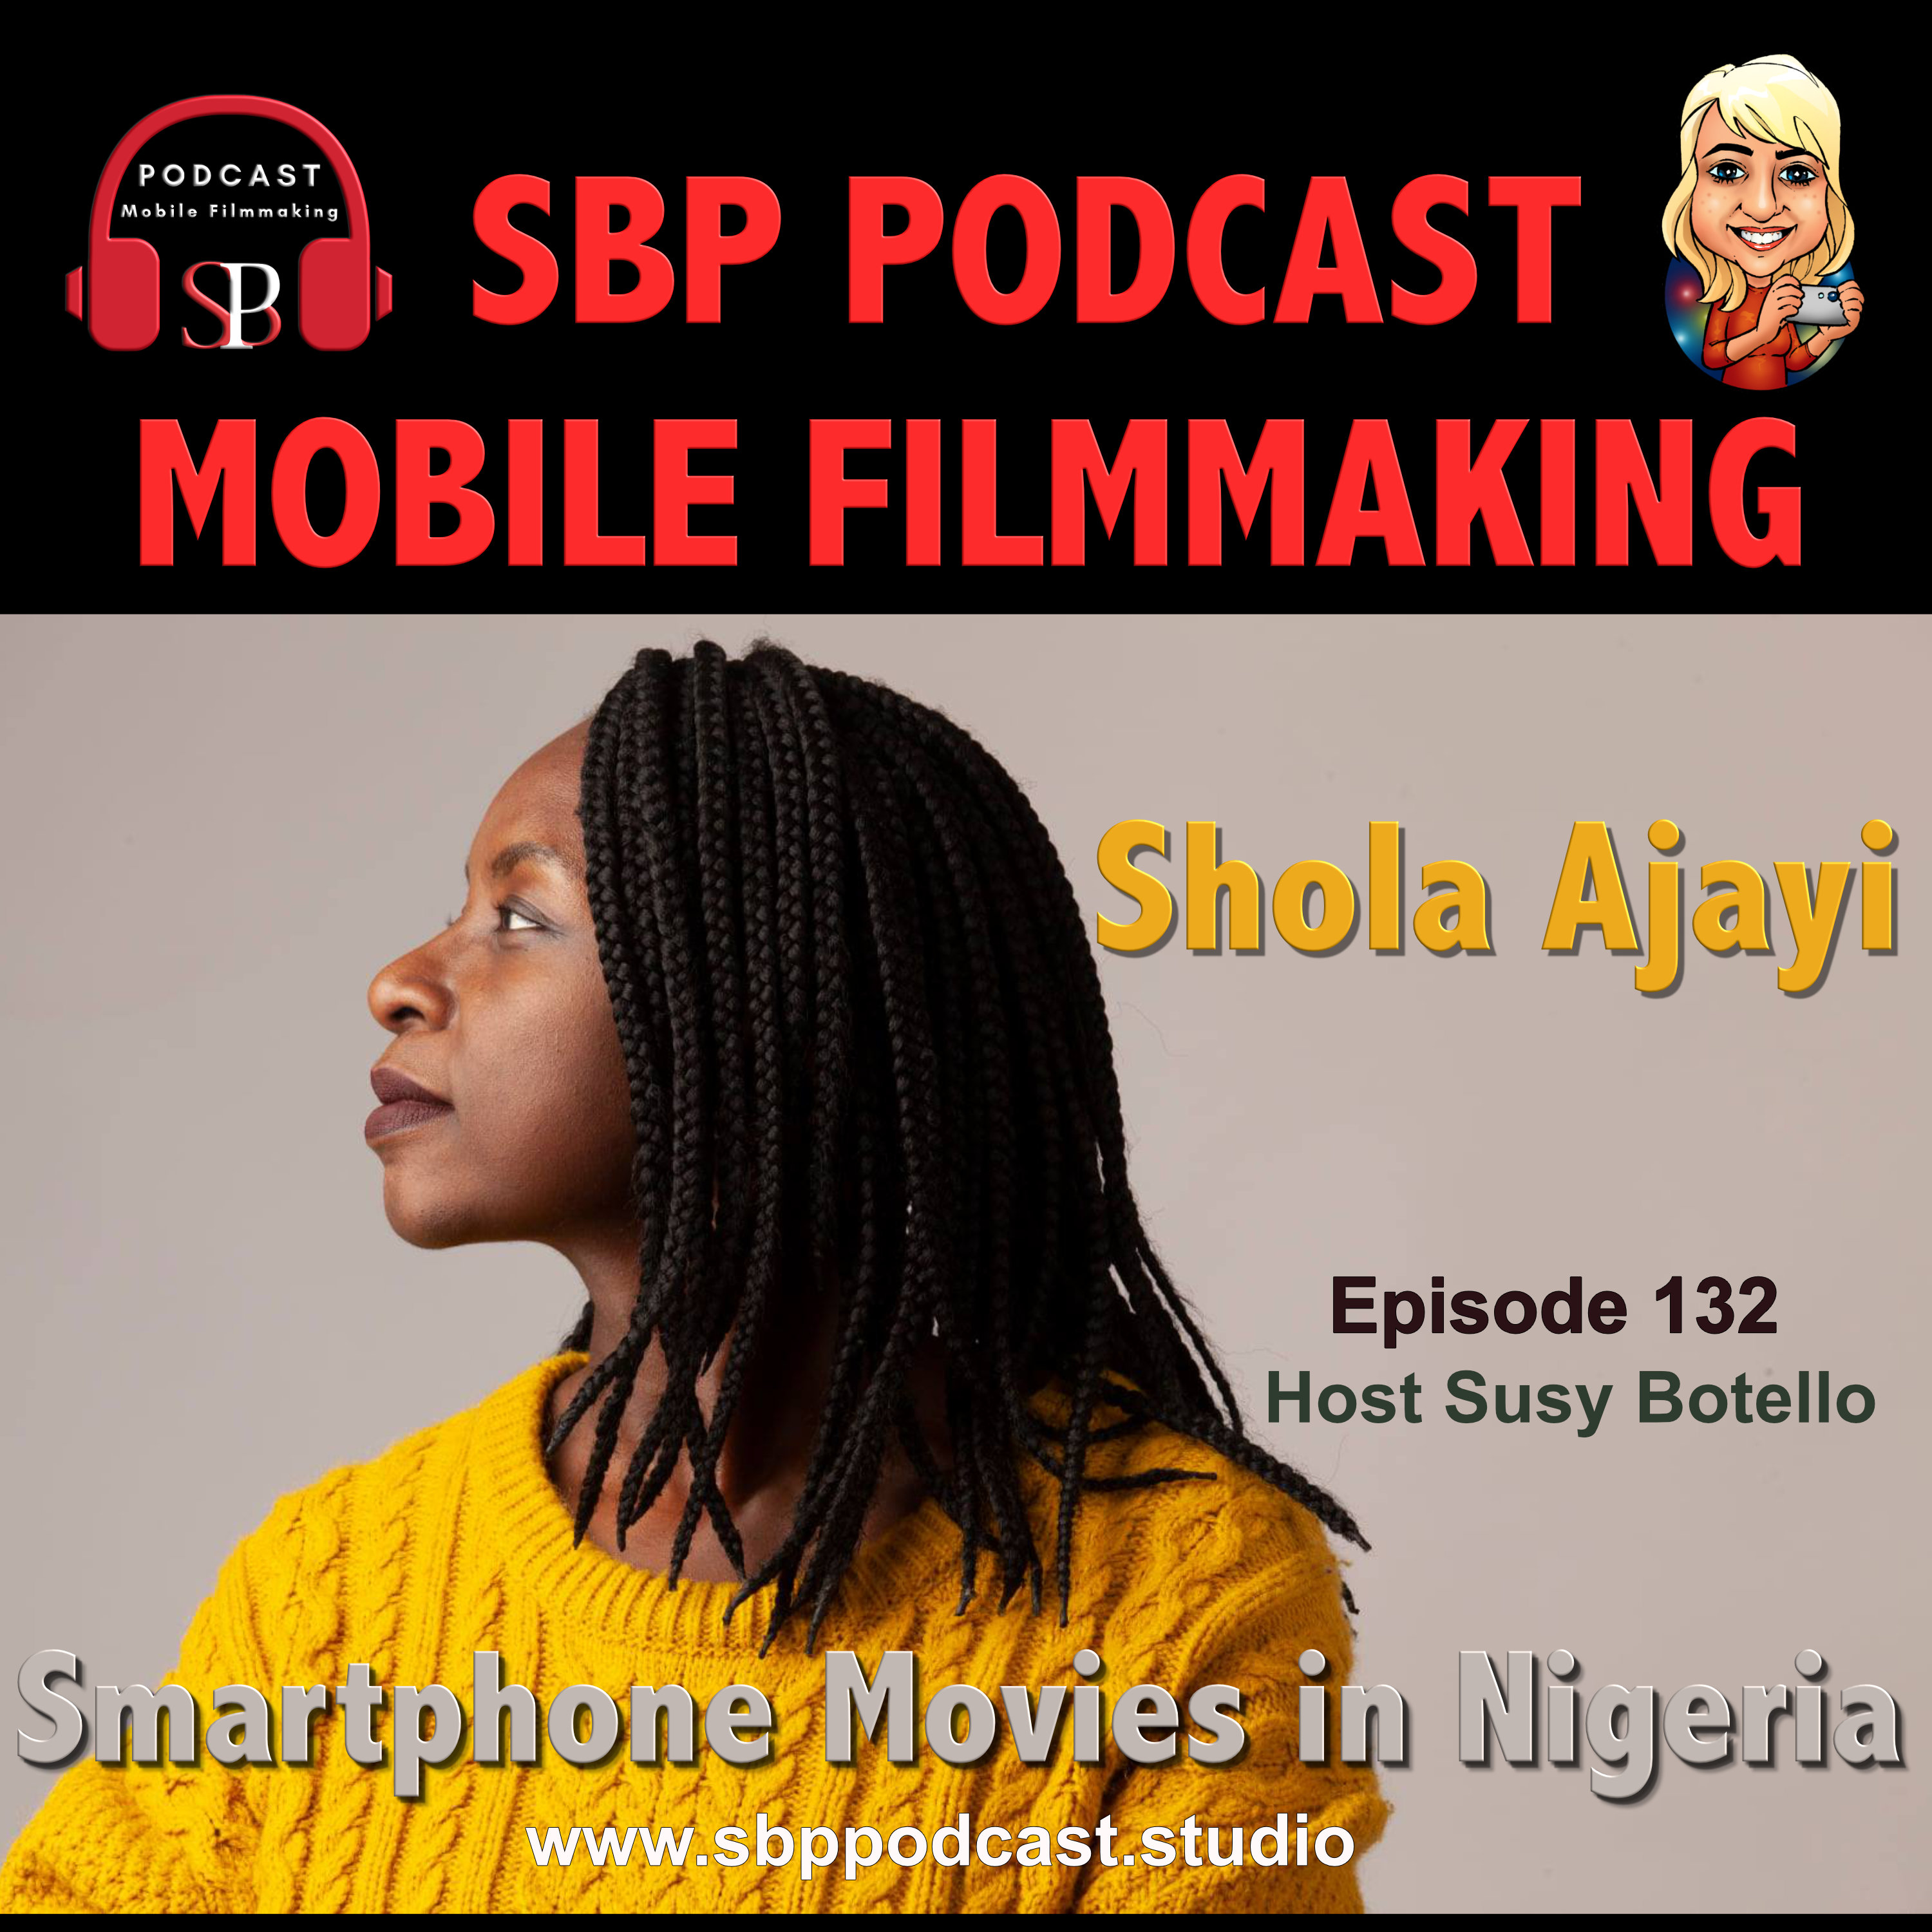 Smartphone Movies in Nigeria with Shola Ajayi